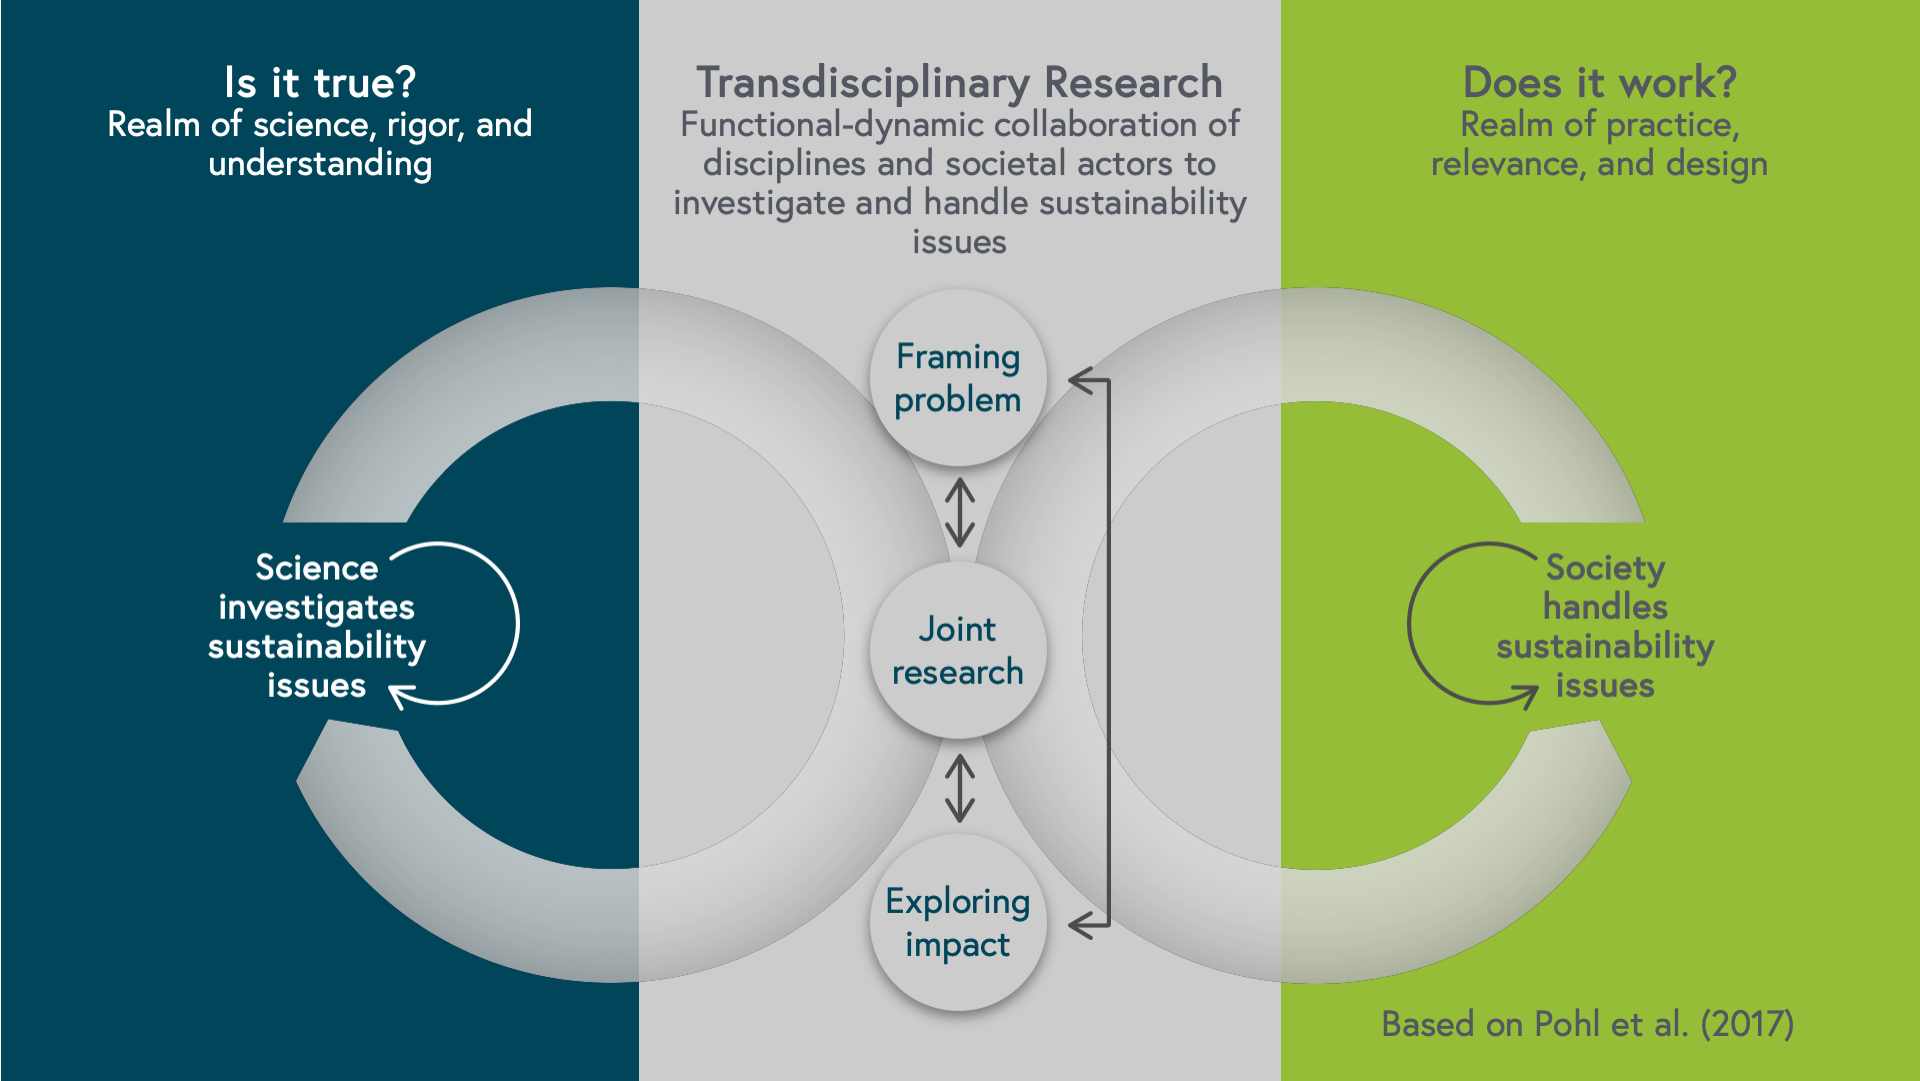 Diagram depicting the TDR process, which connects scientific knowledge production and societal problem handling. It shows three columns. From left to right: The realm of science, rigour and understanding the realm characterised by the question “Is it true?”. In the middle is the realm of transdisciplinary research, in which the functional-dynamic collaboration of disciplines and societal actors to investigate and handle sustainability issues takes place. The right-hand column is characterised by the question “Does it work?”. It is the realm of practice, relevance and design. In the left column science investigates sustainability issues, in the right-hand column society handles sustainability issues. In between transdisciplinary research happens in three phases: framing the problem, joint research and exploring impact. Arrows connect these phases and show that each phase influences the others and that the process is iterative. Big arrows form circles between transdisciplinary research and the realm of science on the one hand and transdisciplinary research and the realm of practice on the other hand. This shows that the process also between these three realms is to be considered on-going, one is in constant exchange with the others, brokering the knowledges that are created.